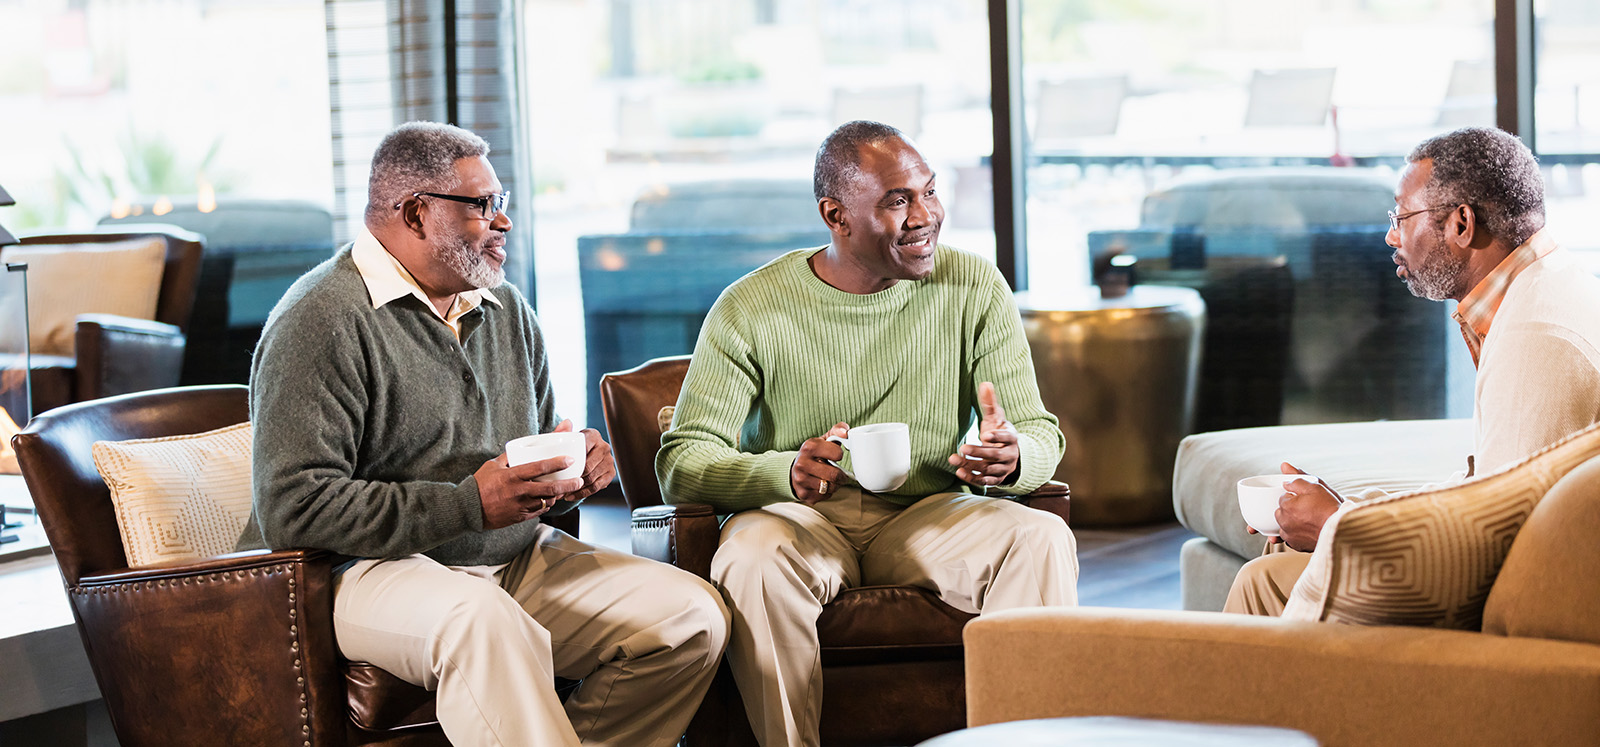 Three mature African-American men sitting in a lounge conversing, drinking coffee.